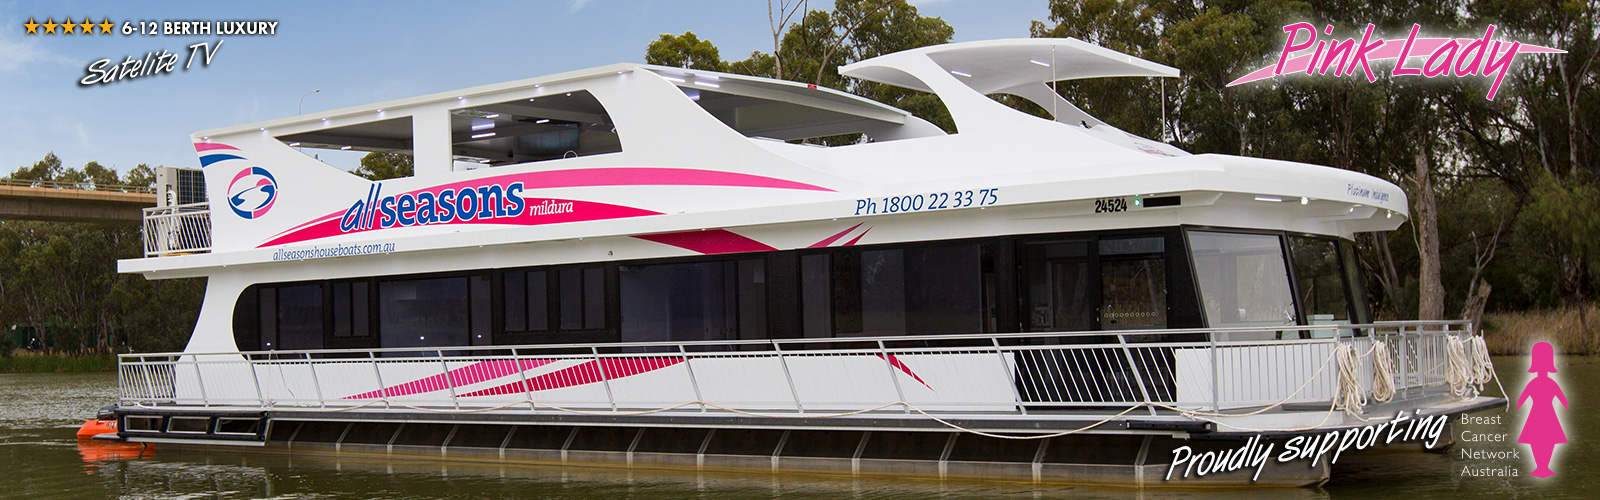 Lowest prices here for Platinum Indulgence Houseboat All Seasons Houseboats pic